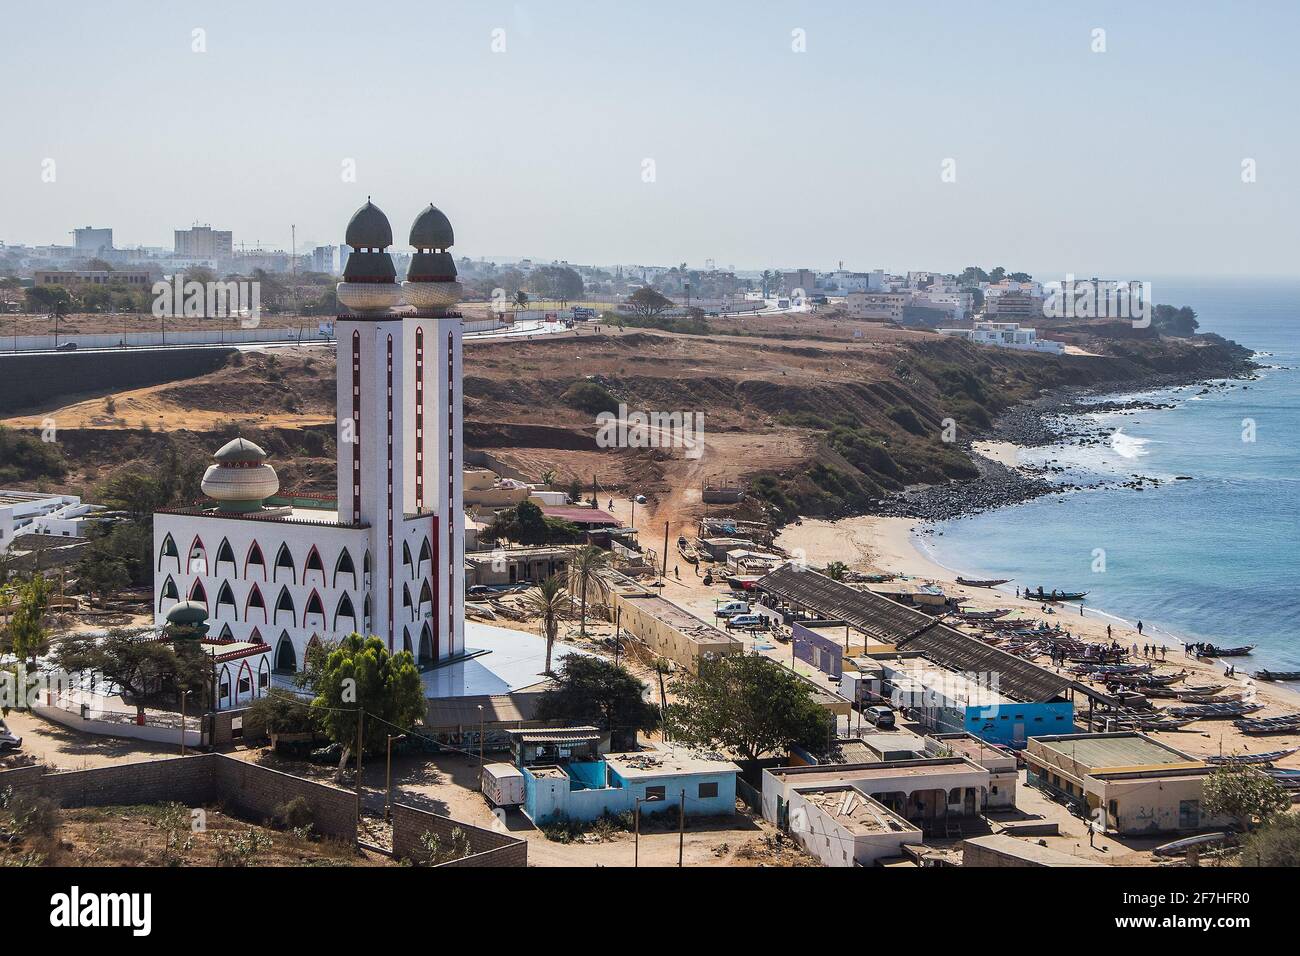 Mosque of divinity or mosquee de la divinite in Dakar, Senegal, viewed from a higher perspective on a sunny day. City of Dakar in the background. Stock Photo